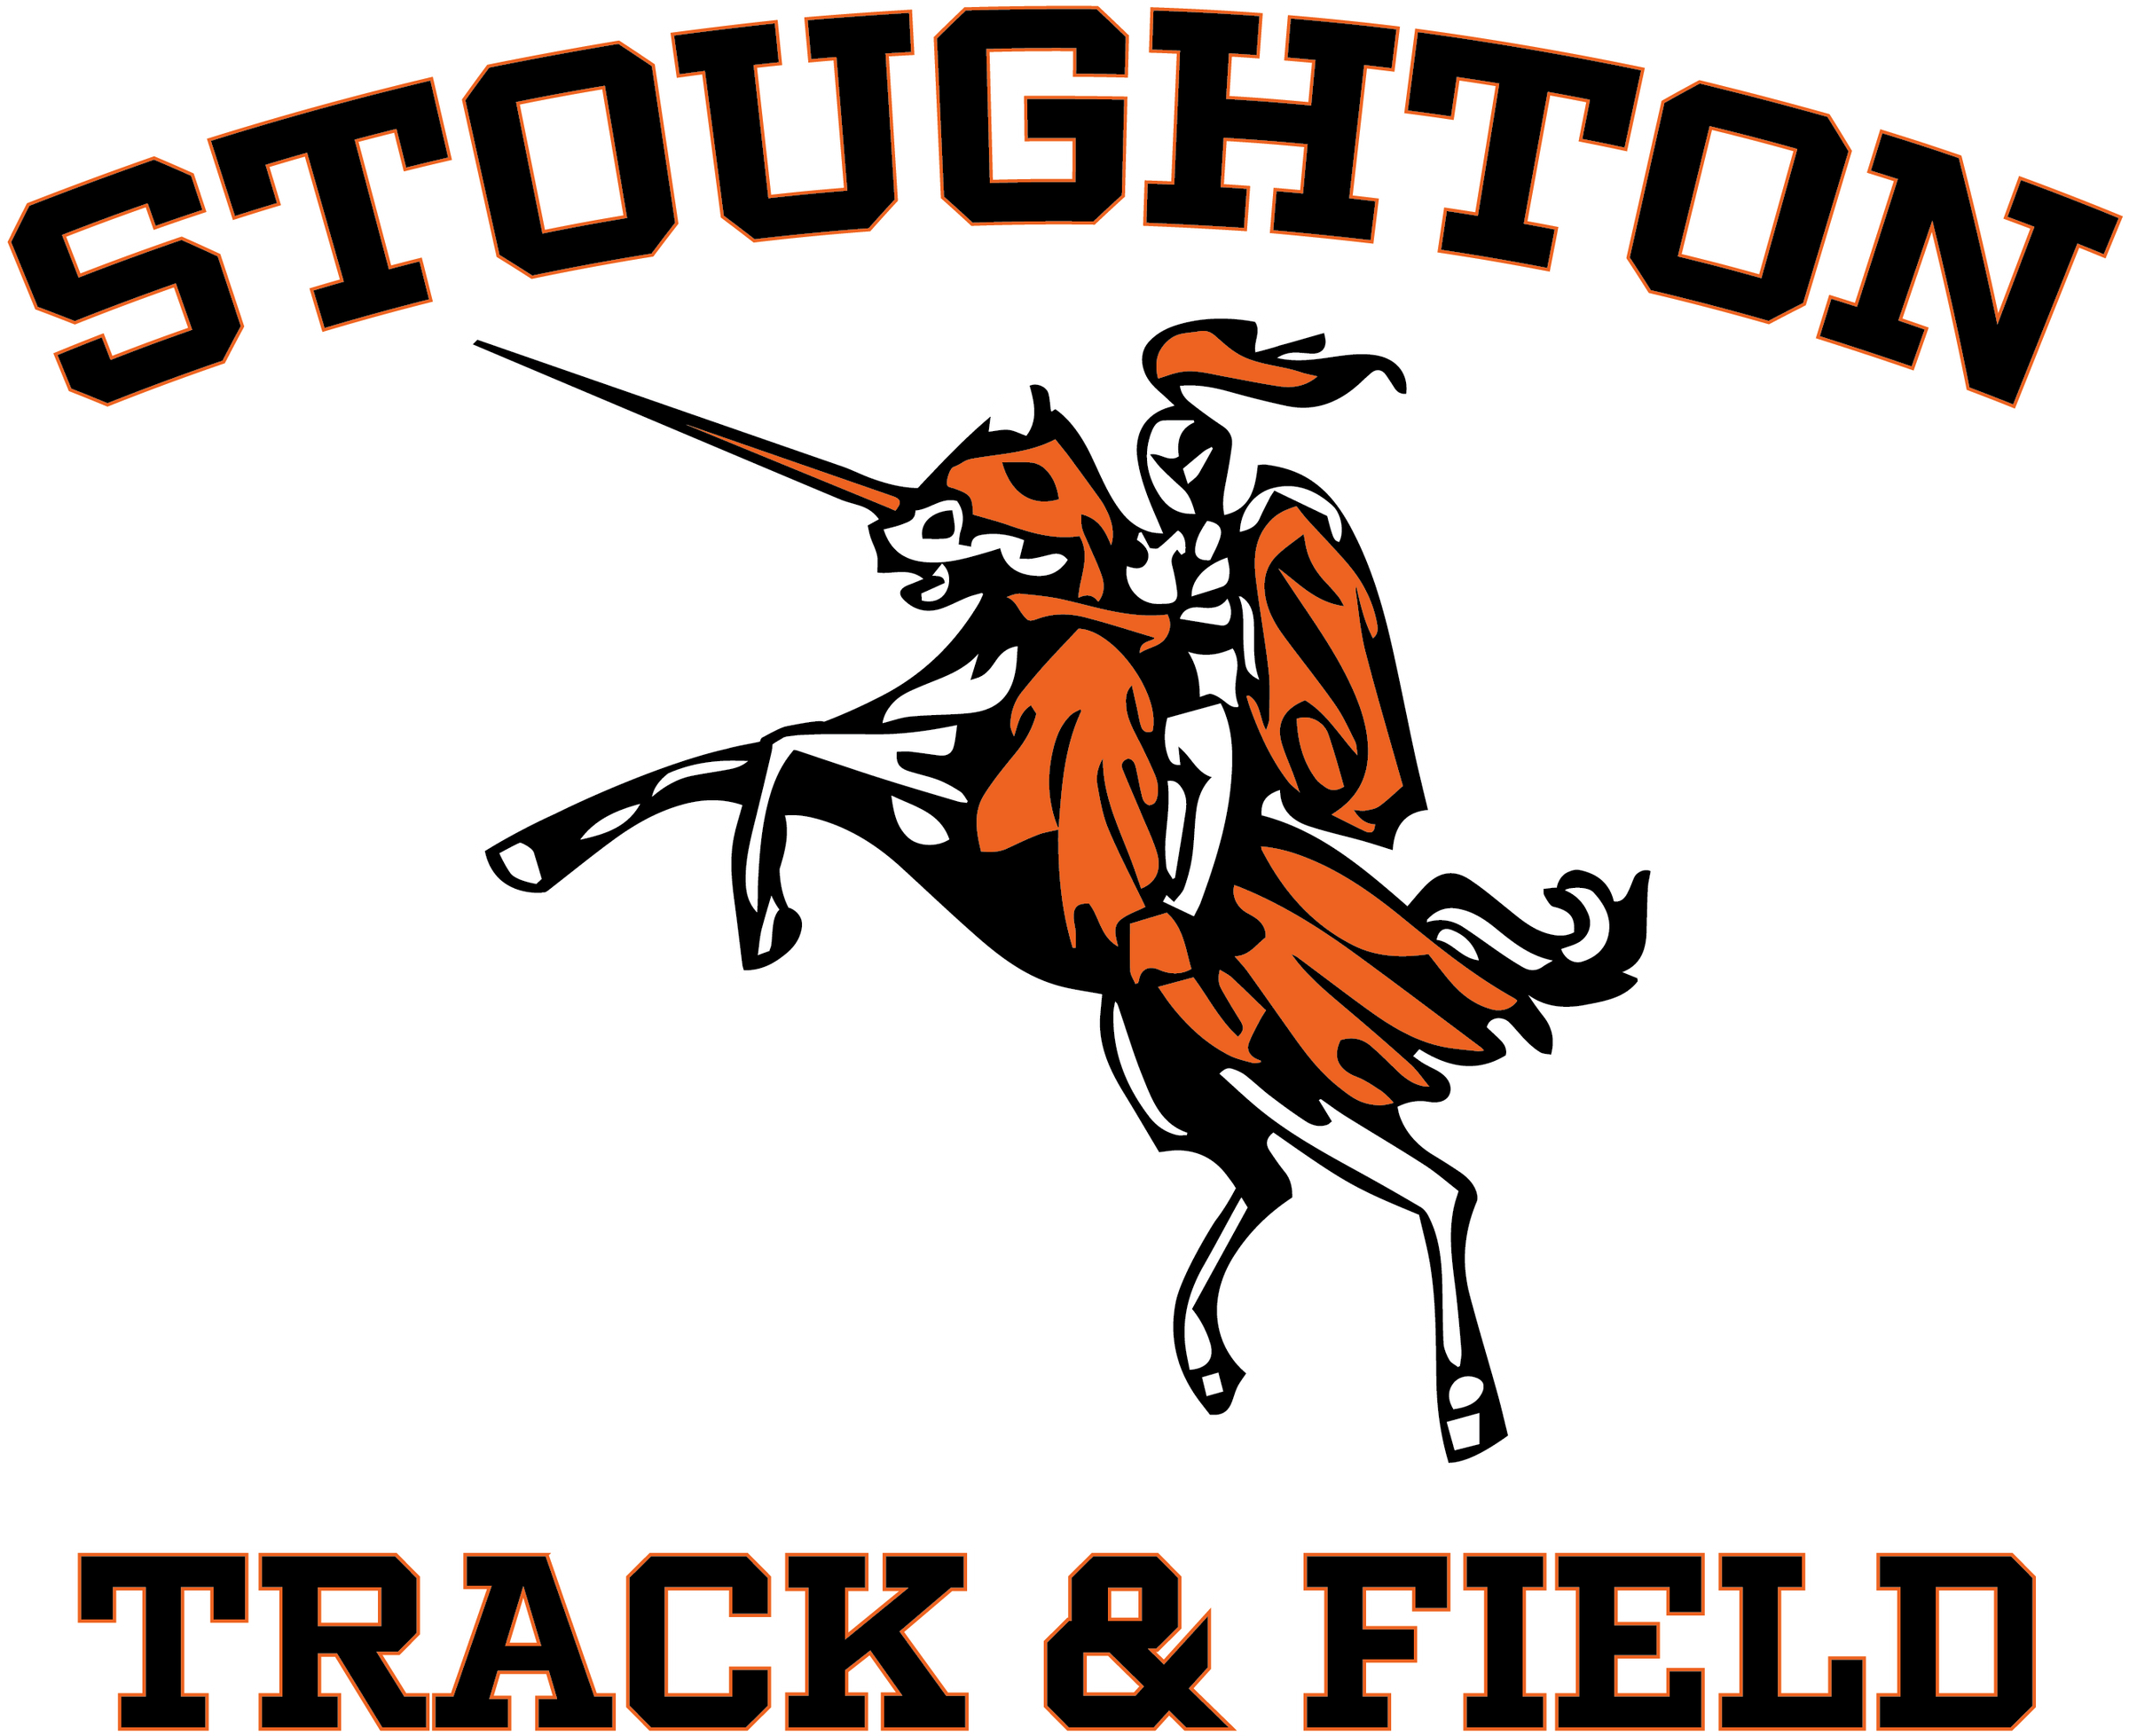 Stoughton Track & Field and Cross Country